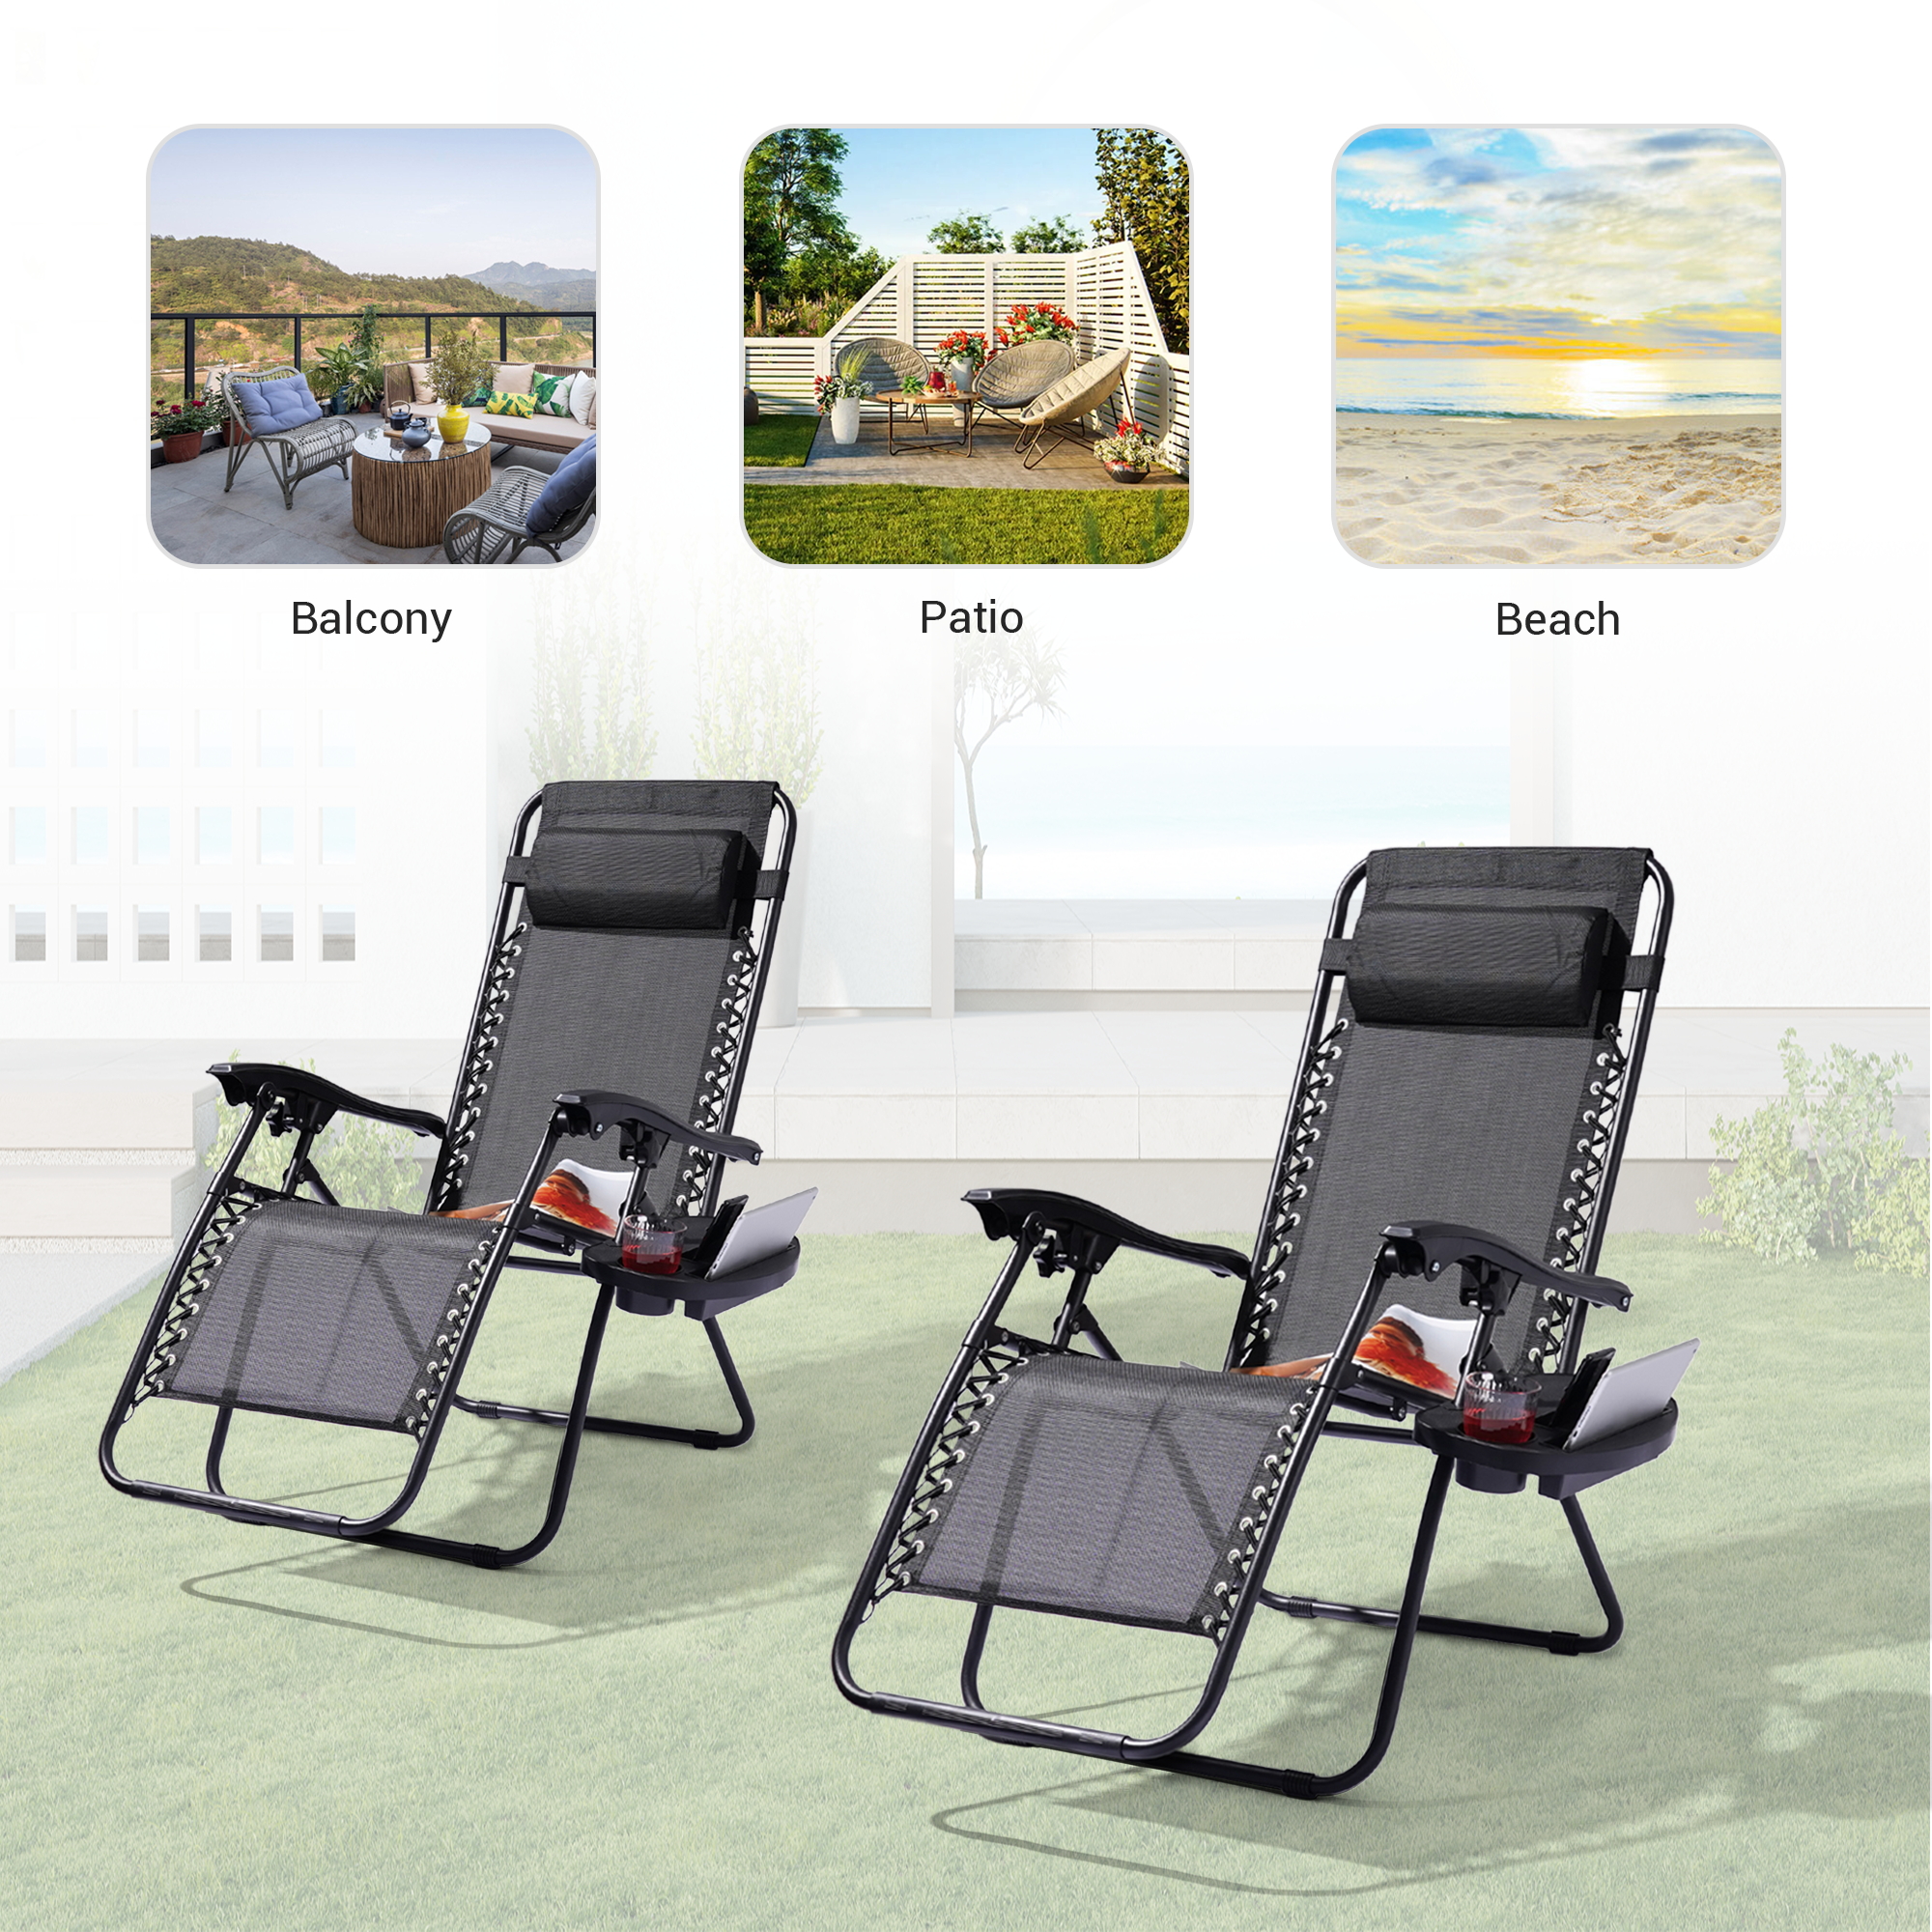 Sonerlic 2 Pcs Outdoor Patio Adjustable Zero Gravity Chair with a Side Tray for Patio,Deck,Poolside and Garden, Black - image 2 of 7